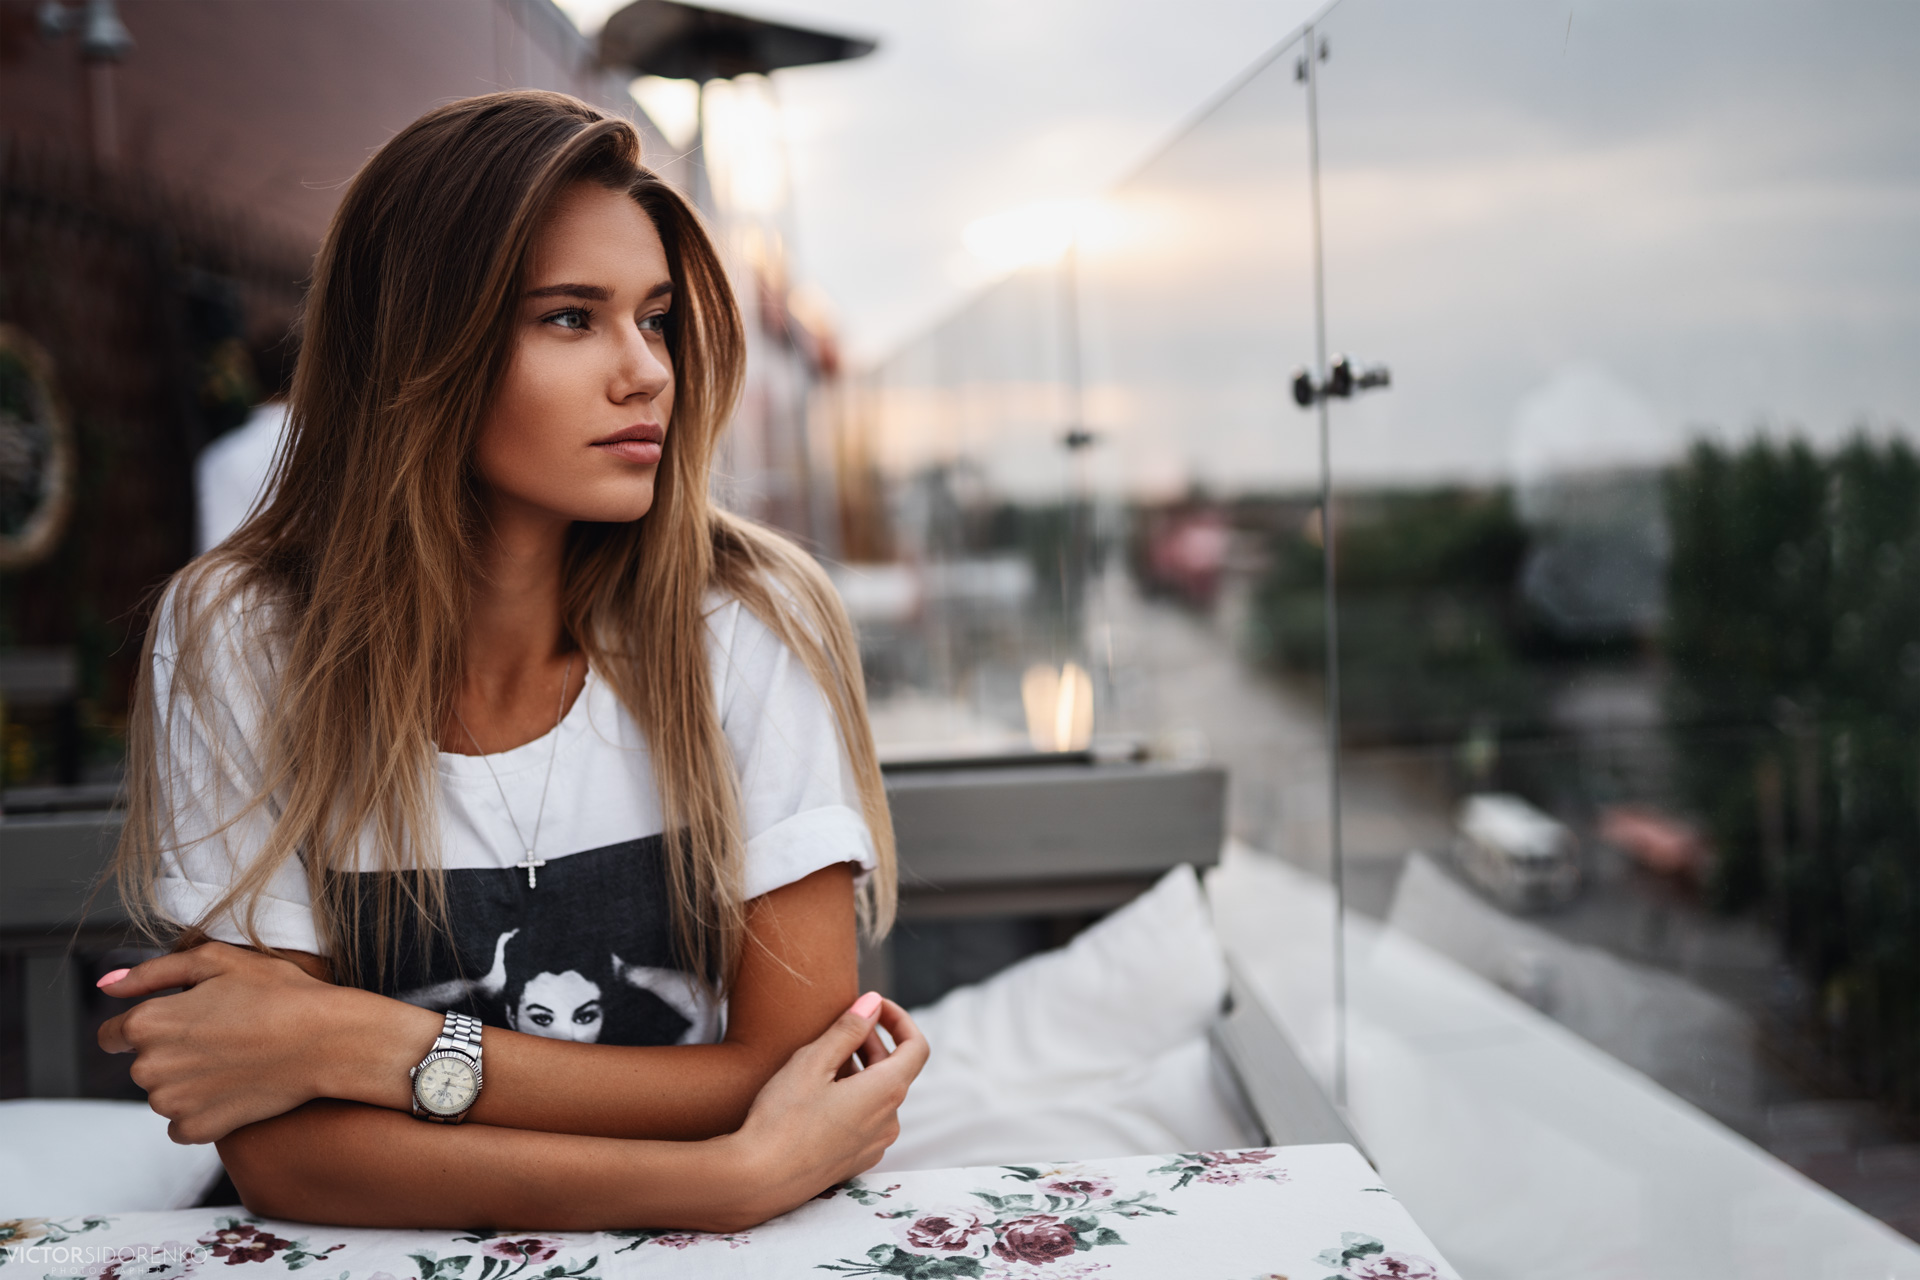 People 1920x1280 women model brunette long hair looking away profile necklace T-shirt arms crossed watch painted nails glass depth of field portrait outdoors women outdoors Victor Sidorenko looking into the distance